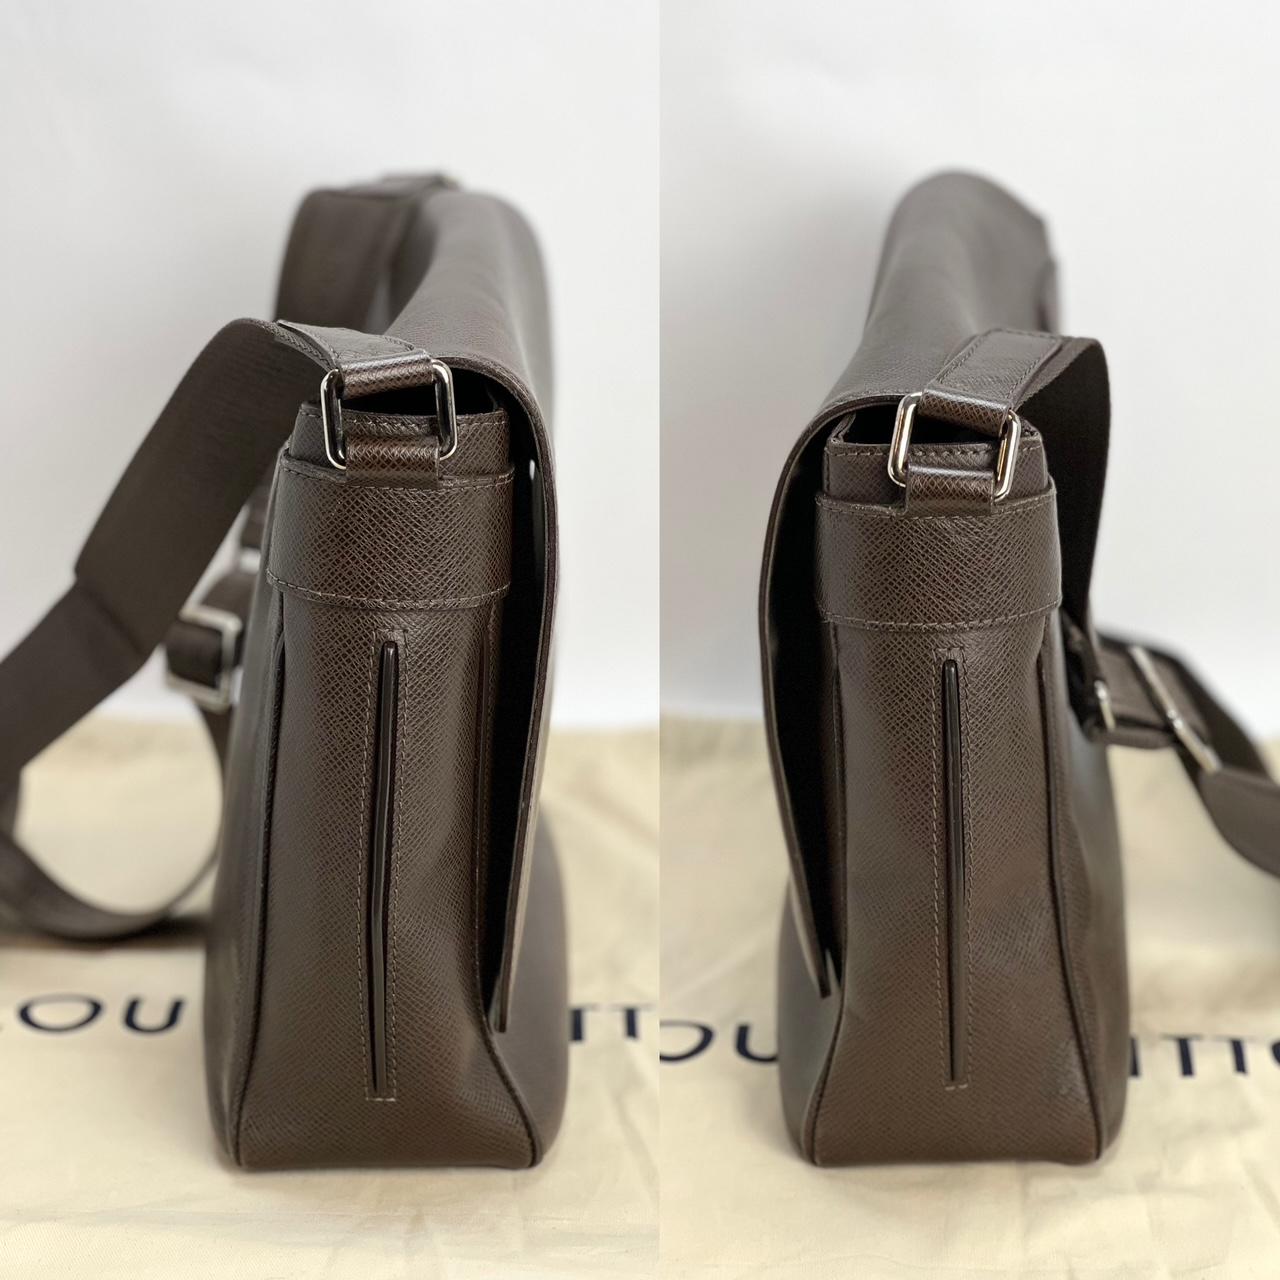 Pre-Owned  100% Authentic
LOUIS VUITTON Taiga Roman MM Messenger Grizzli Leather Bag
RATING: A...excellent, near mint, has little to no
signs of use
MATERIAL: Taiga leather
STRAP: adjustable canvas
DROP: 15'' to 27''
COLOR:  taupe,